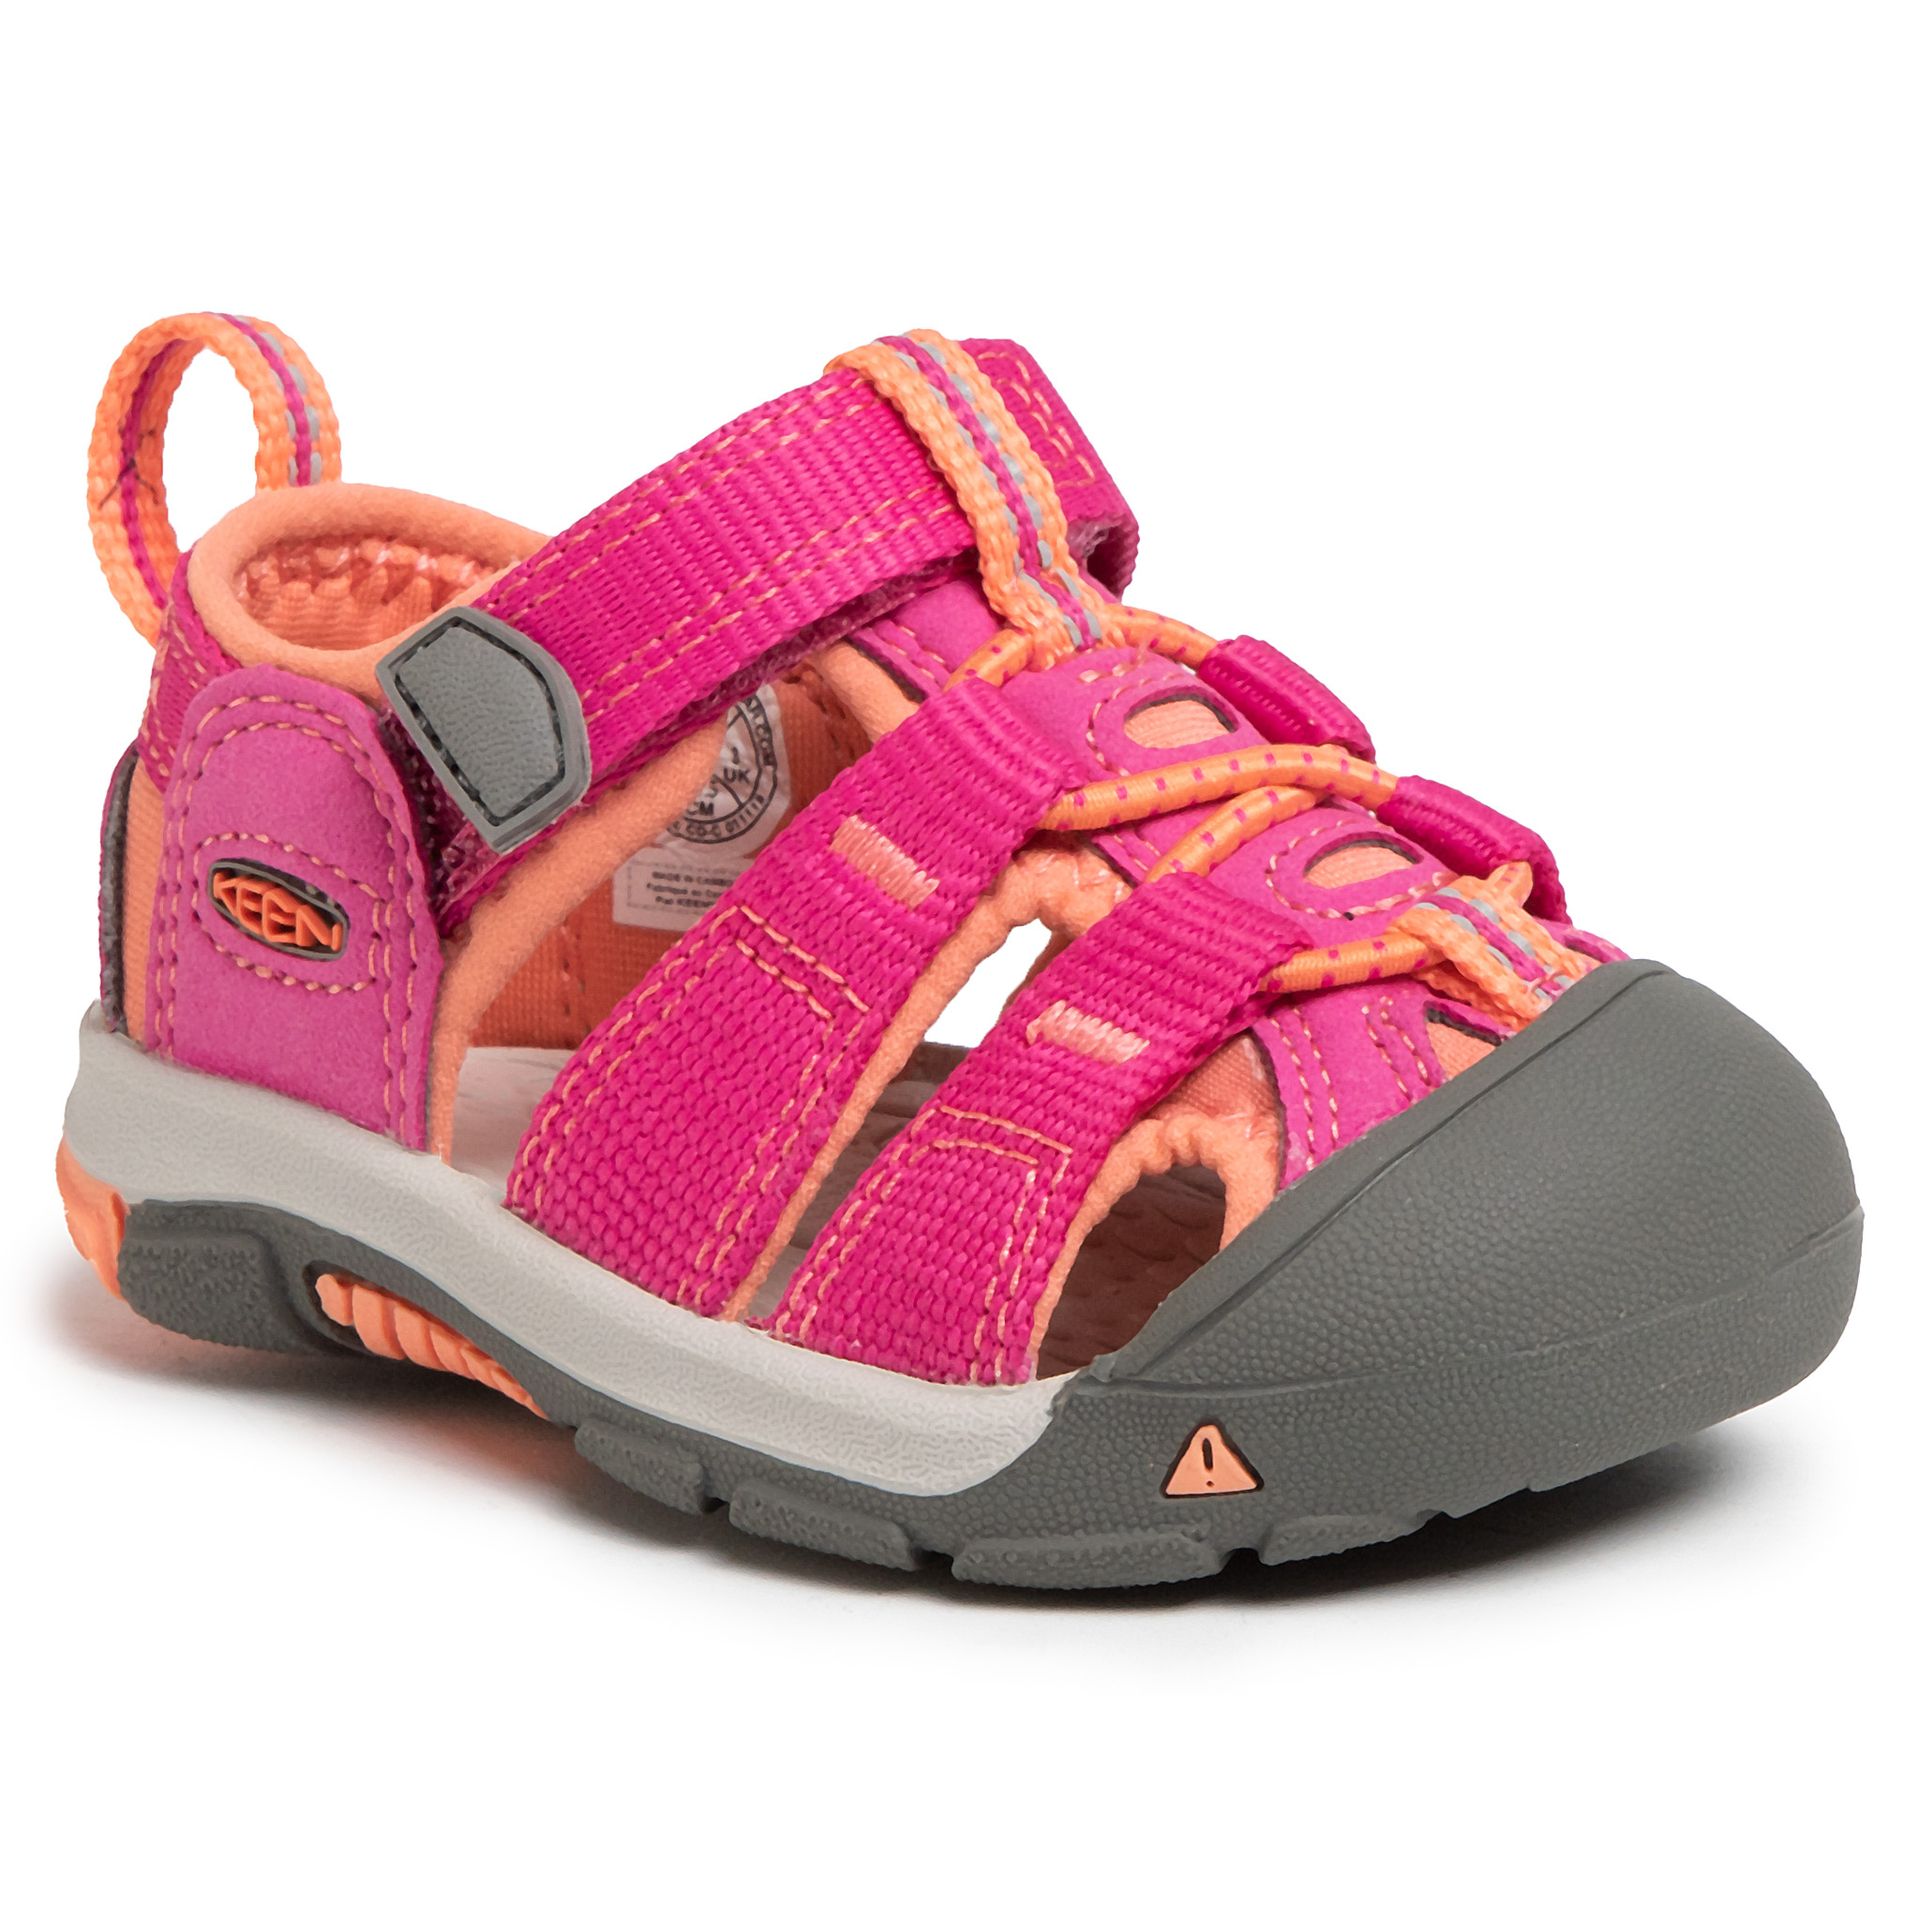 Keen Sandały Newport H2 1021498 Very Berry/Fusion Coral